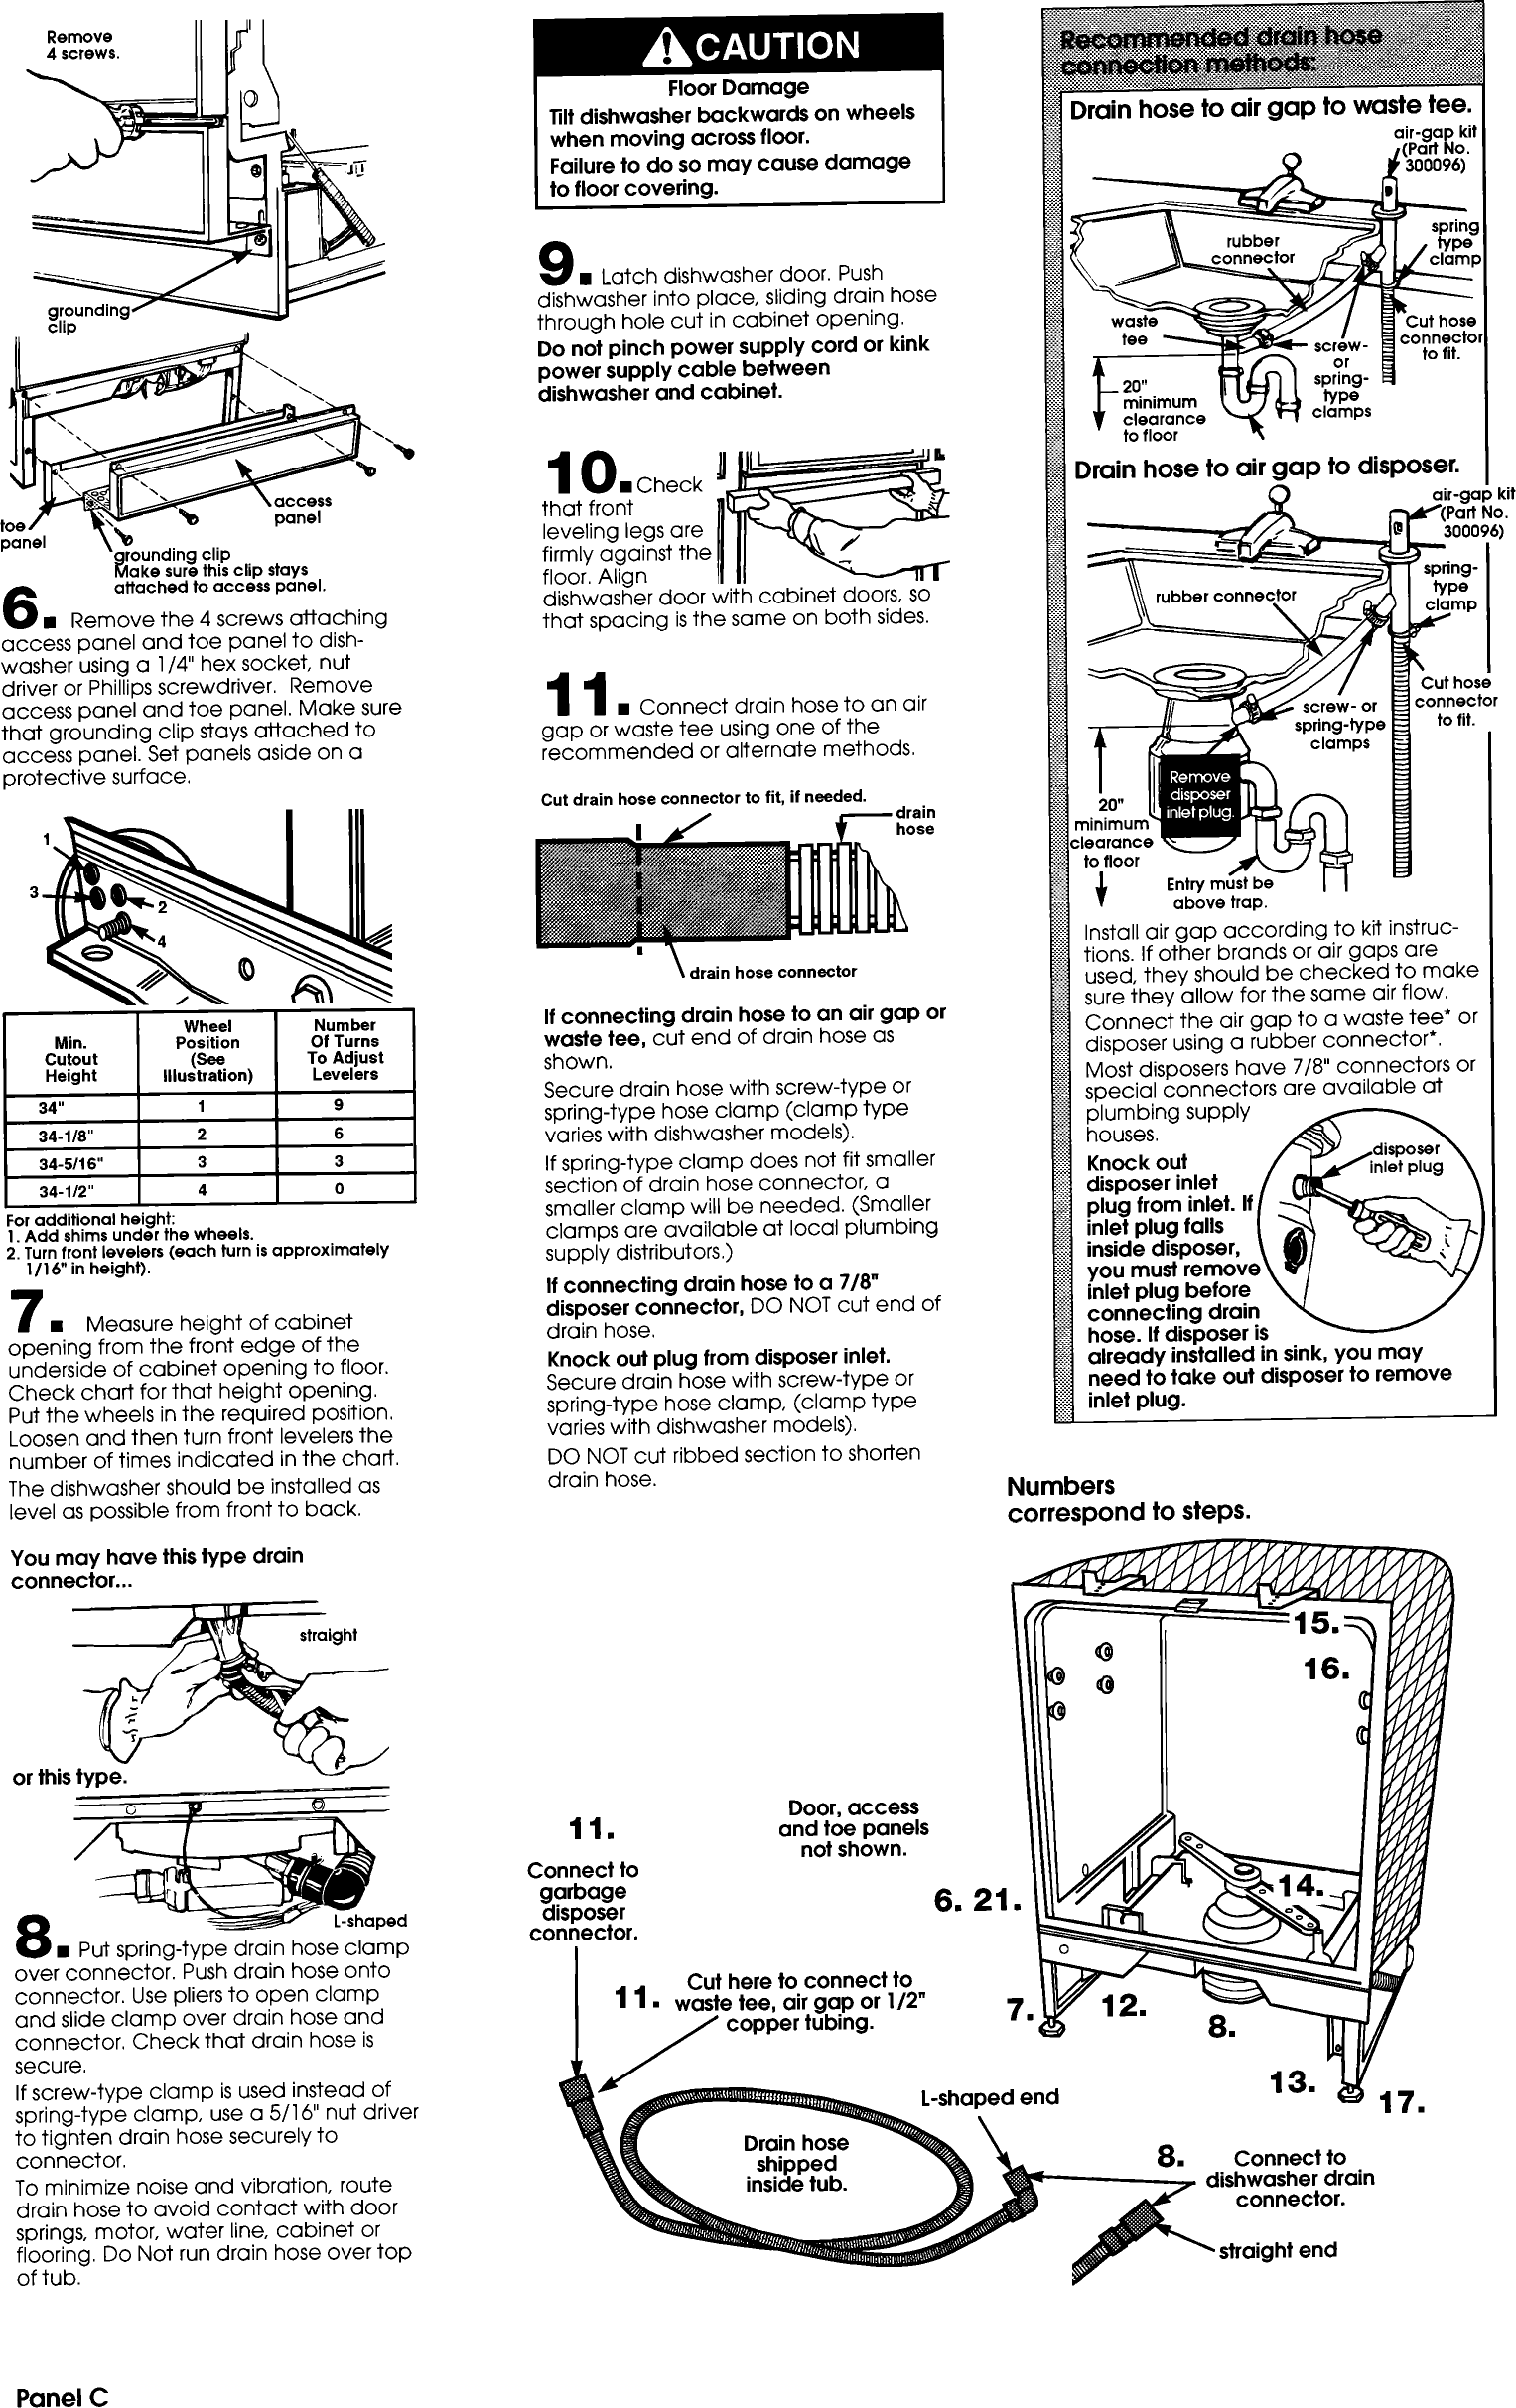 Page 4 of 7 - Whirlpool DU920QWDB2 User Manual  UNDER COUNTER DISHWASHER - Manuals And Guides L0903839